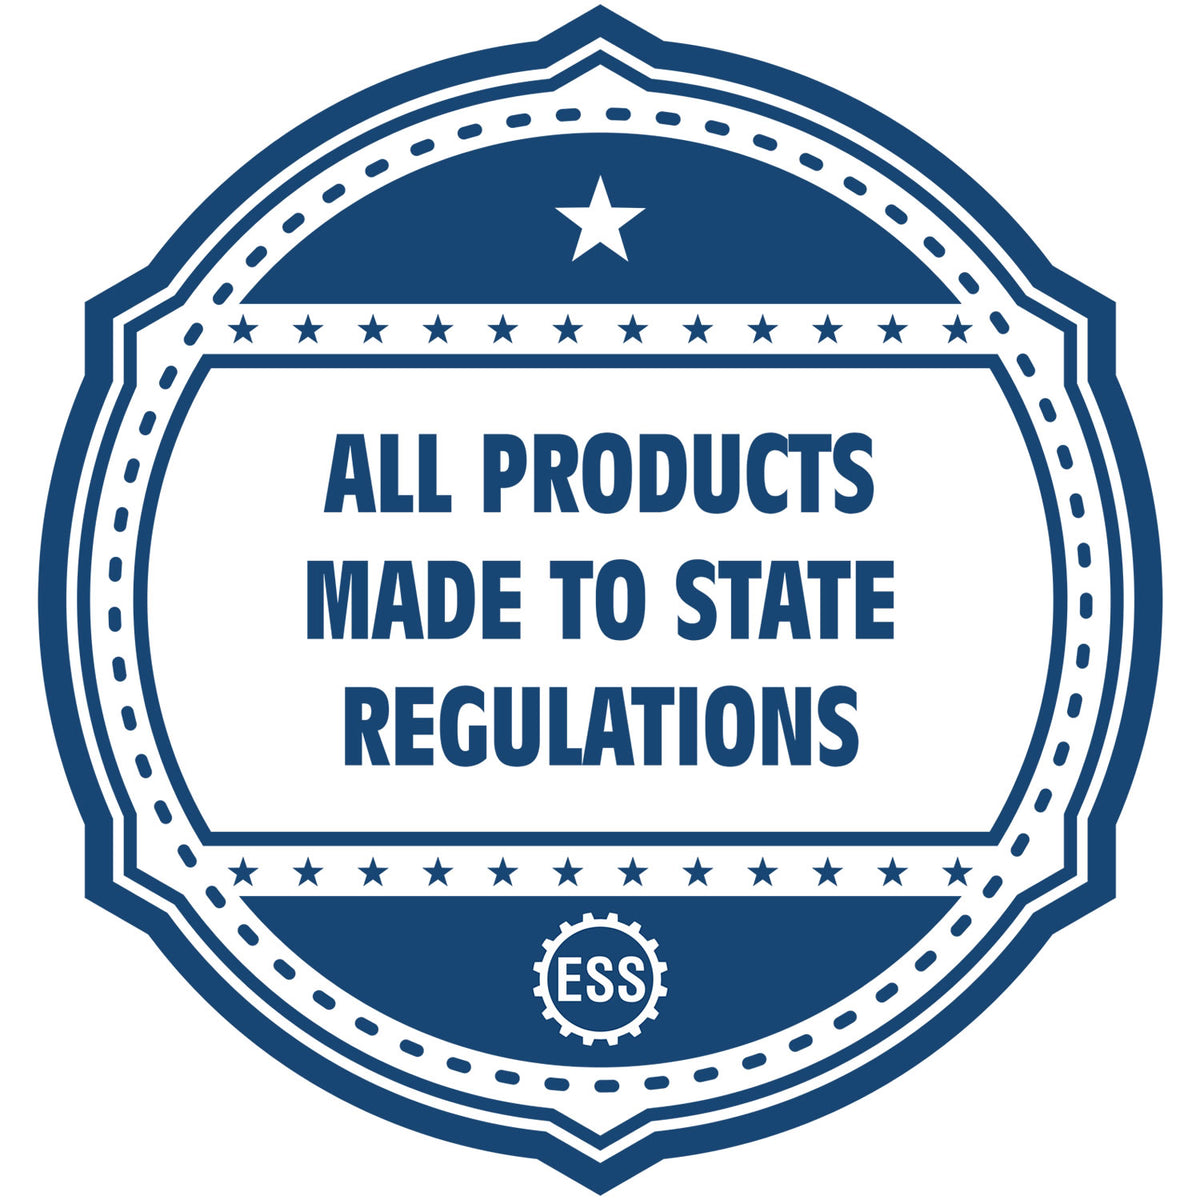 An icon or badge element for the Soft Pocket Arkansas Landscape Architect Embosser showing that this product is made in compliance with state regulations.